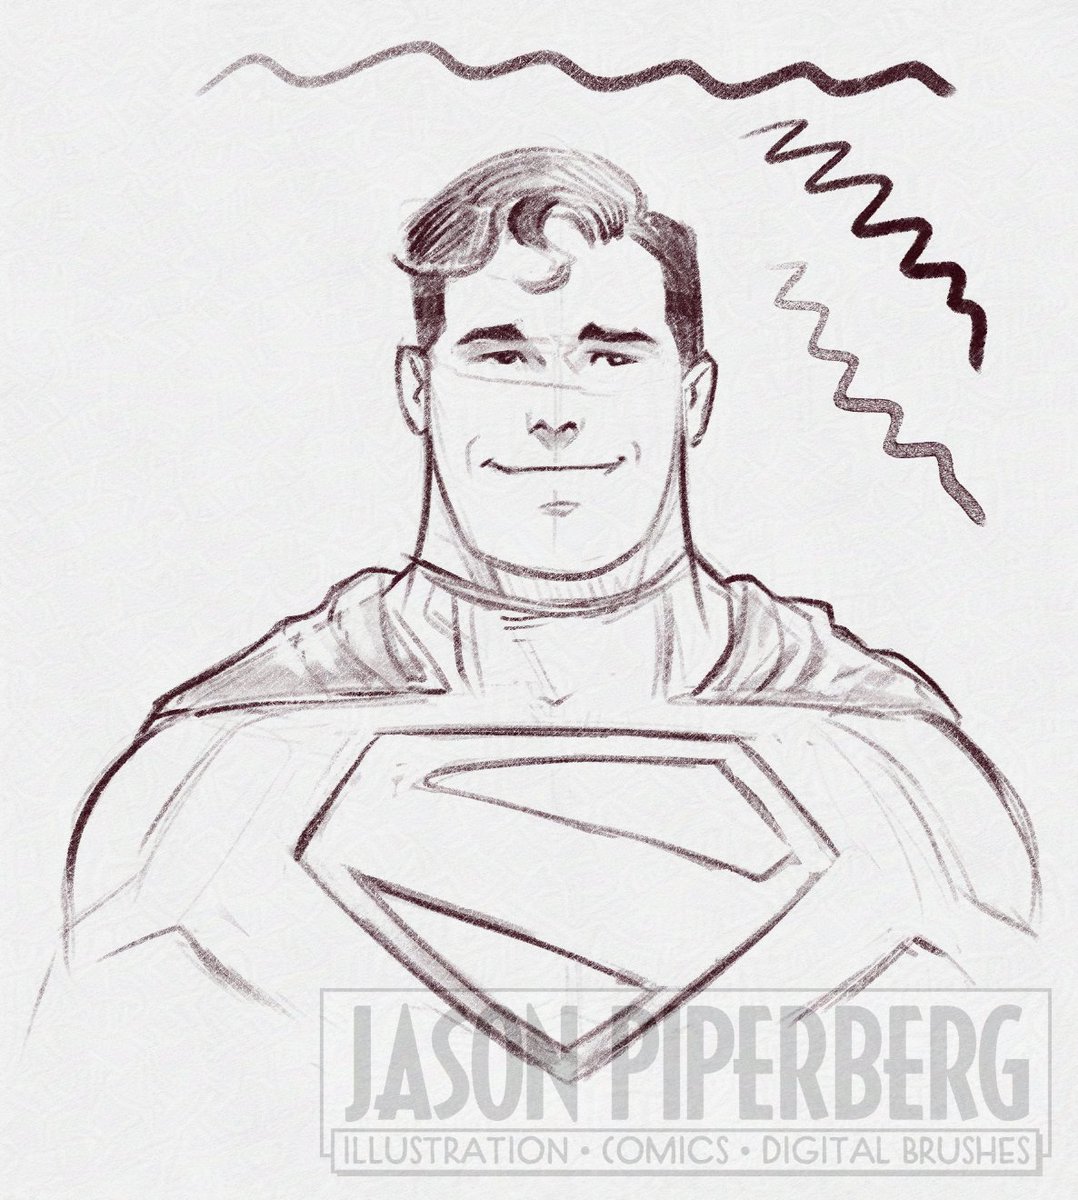 Made some new pencil brushes this morning and did this quick #Superman sketch inspired by that first look we got yesterday! I'll soon be adding these pencil brushes as an update to my Scruffy pencils pack, as well as the Textured inkers and scruffy pencils bundle.